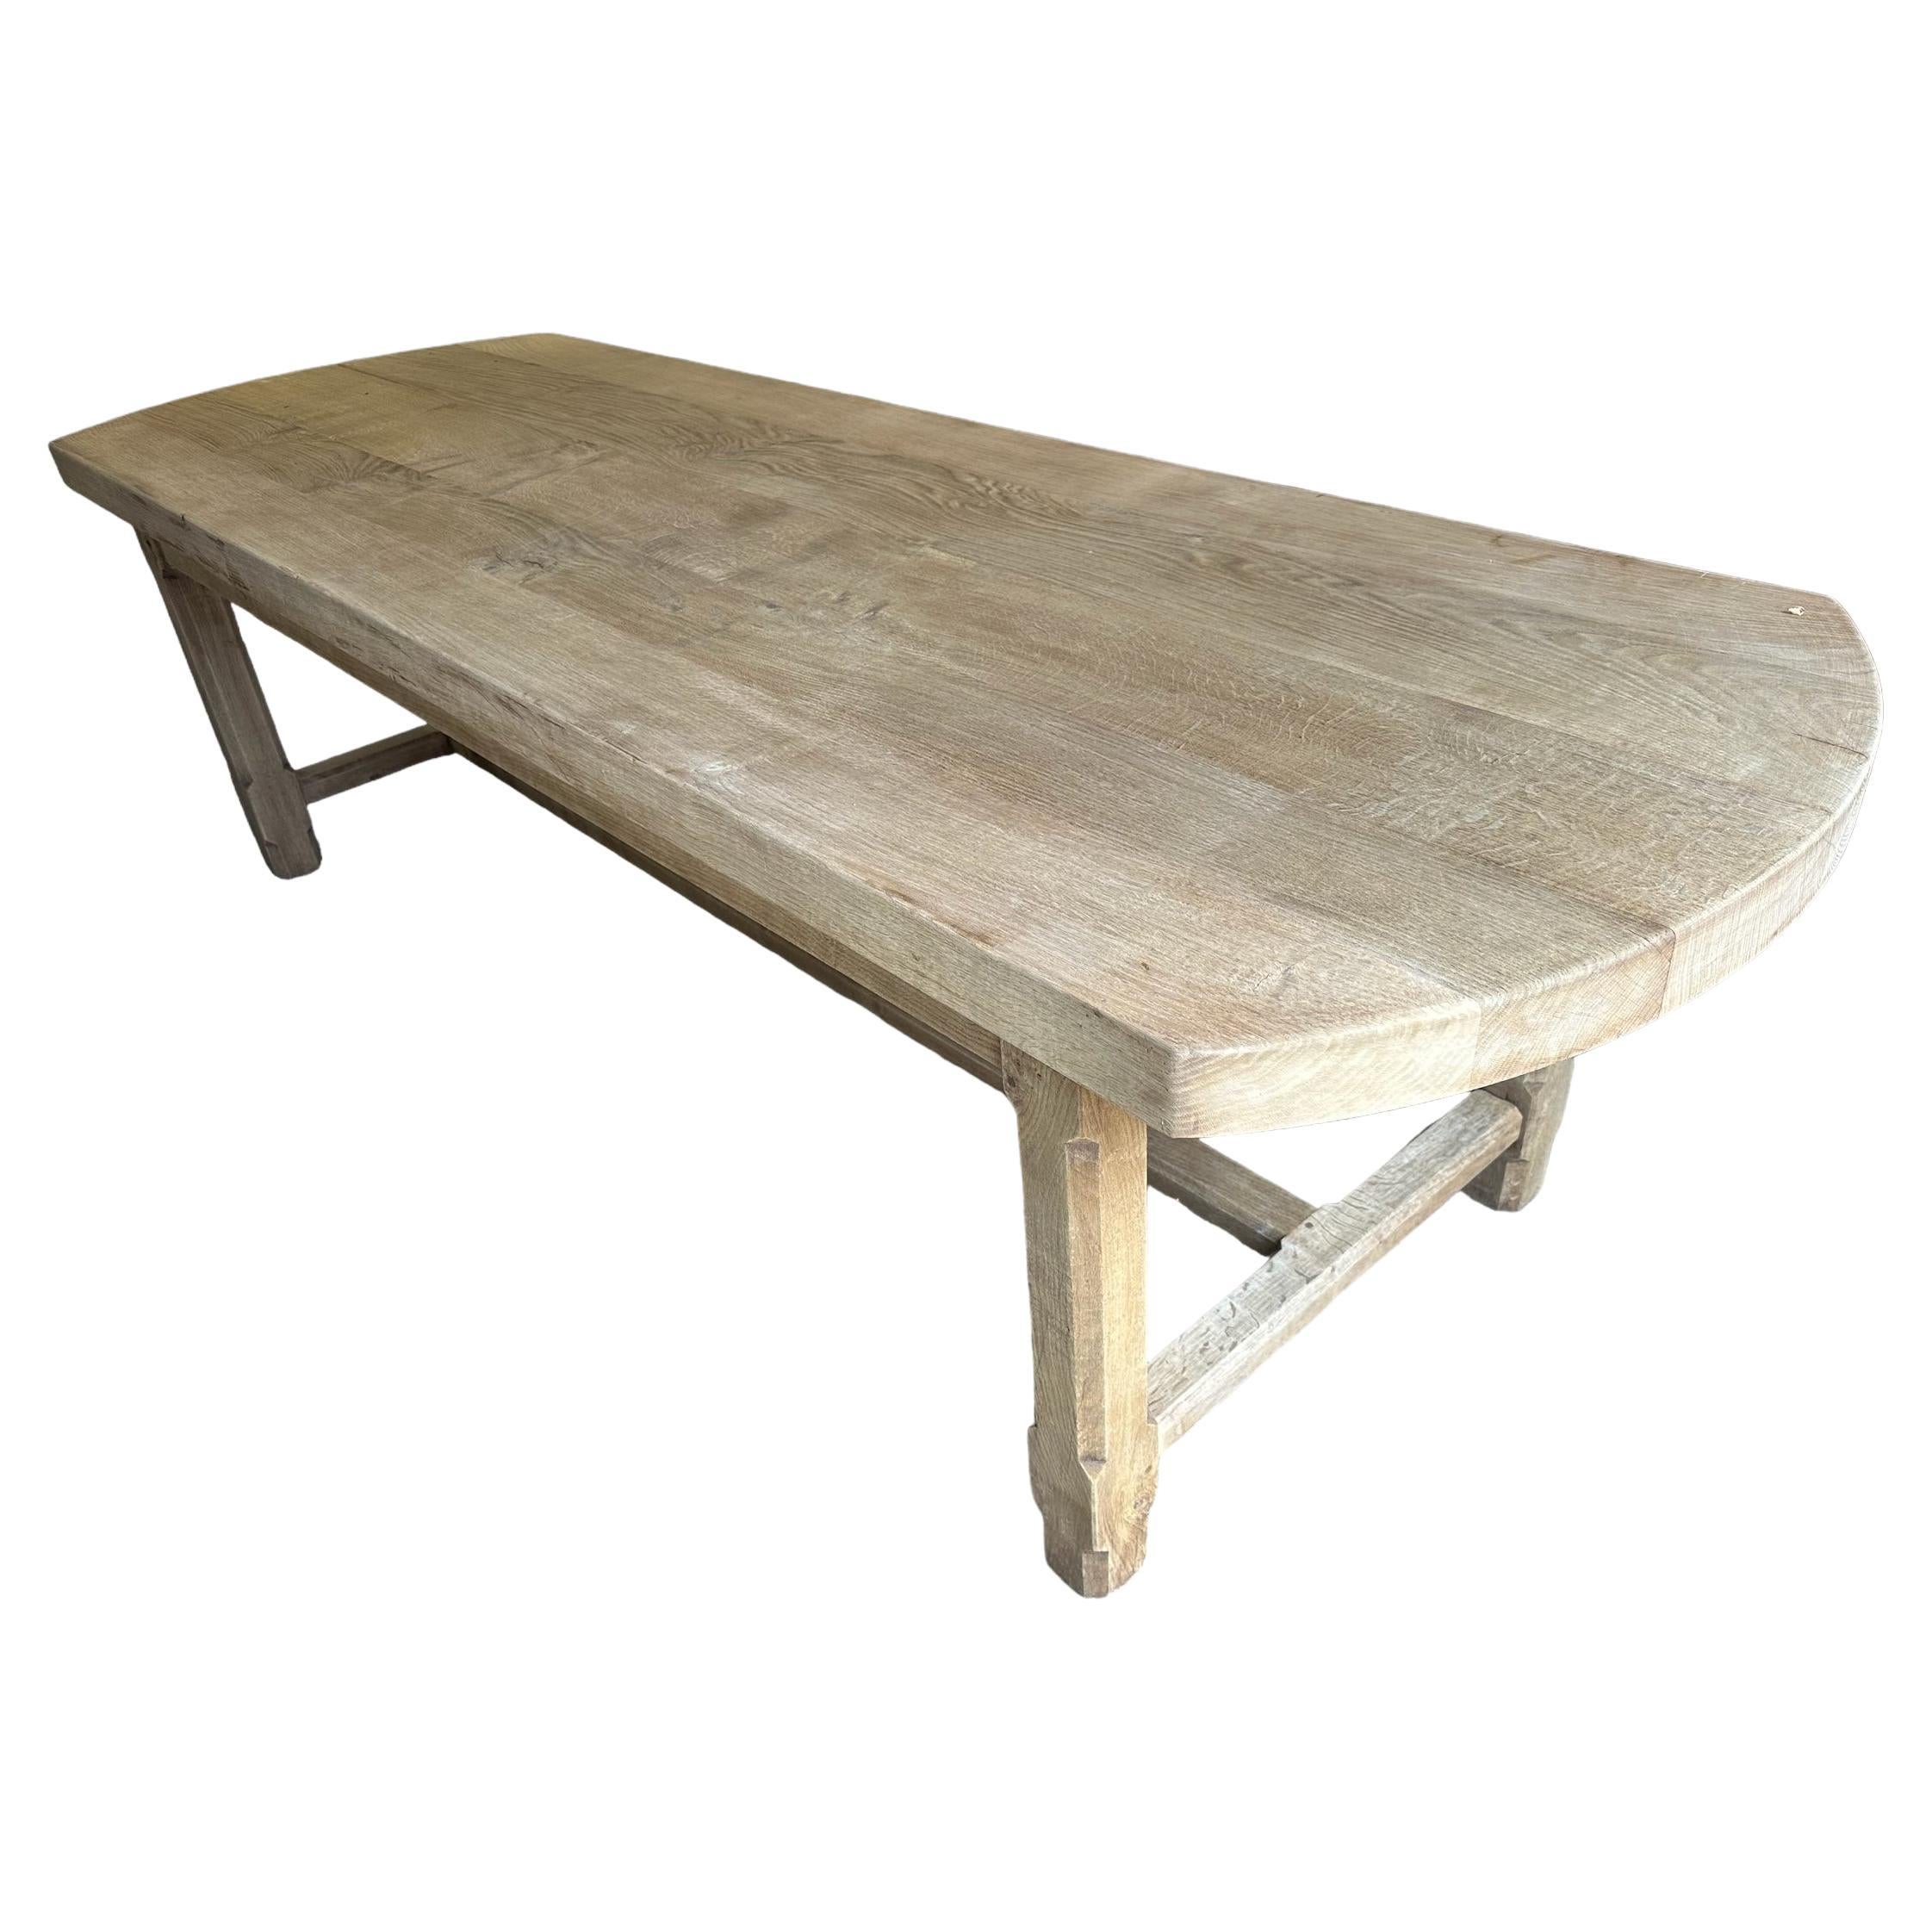 Oval Ended Pale Bleached Oak Refectory Dining Table For Sale